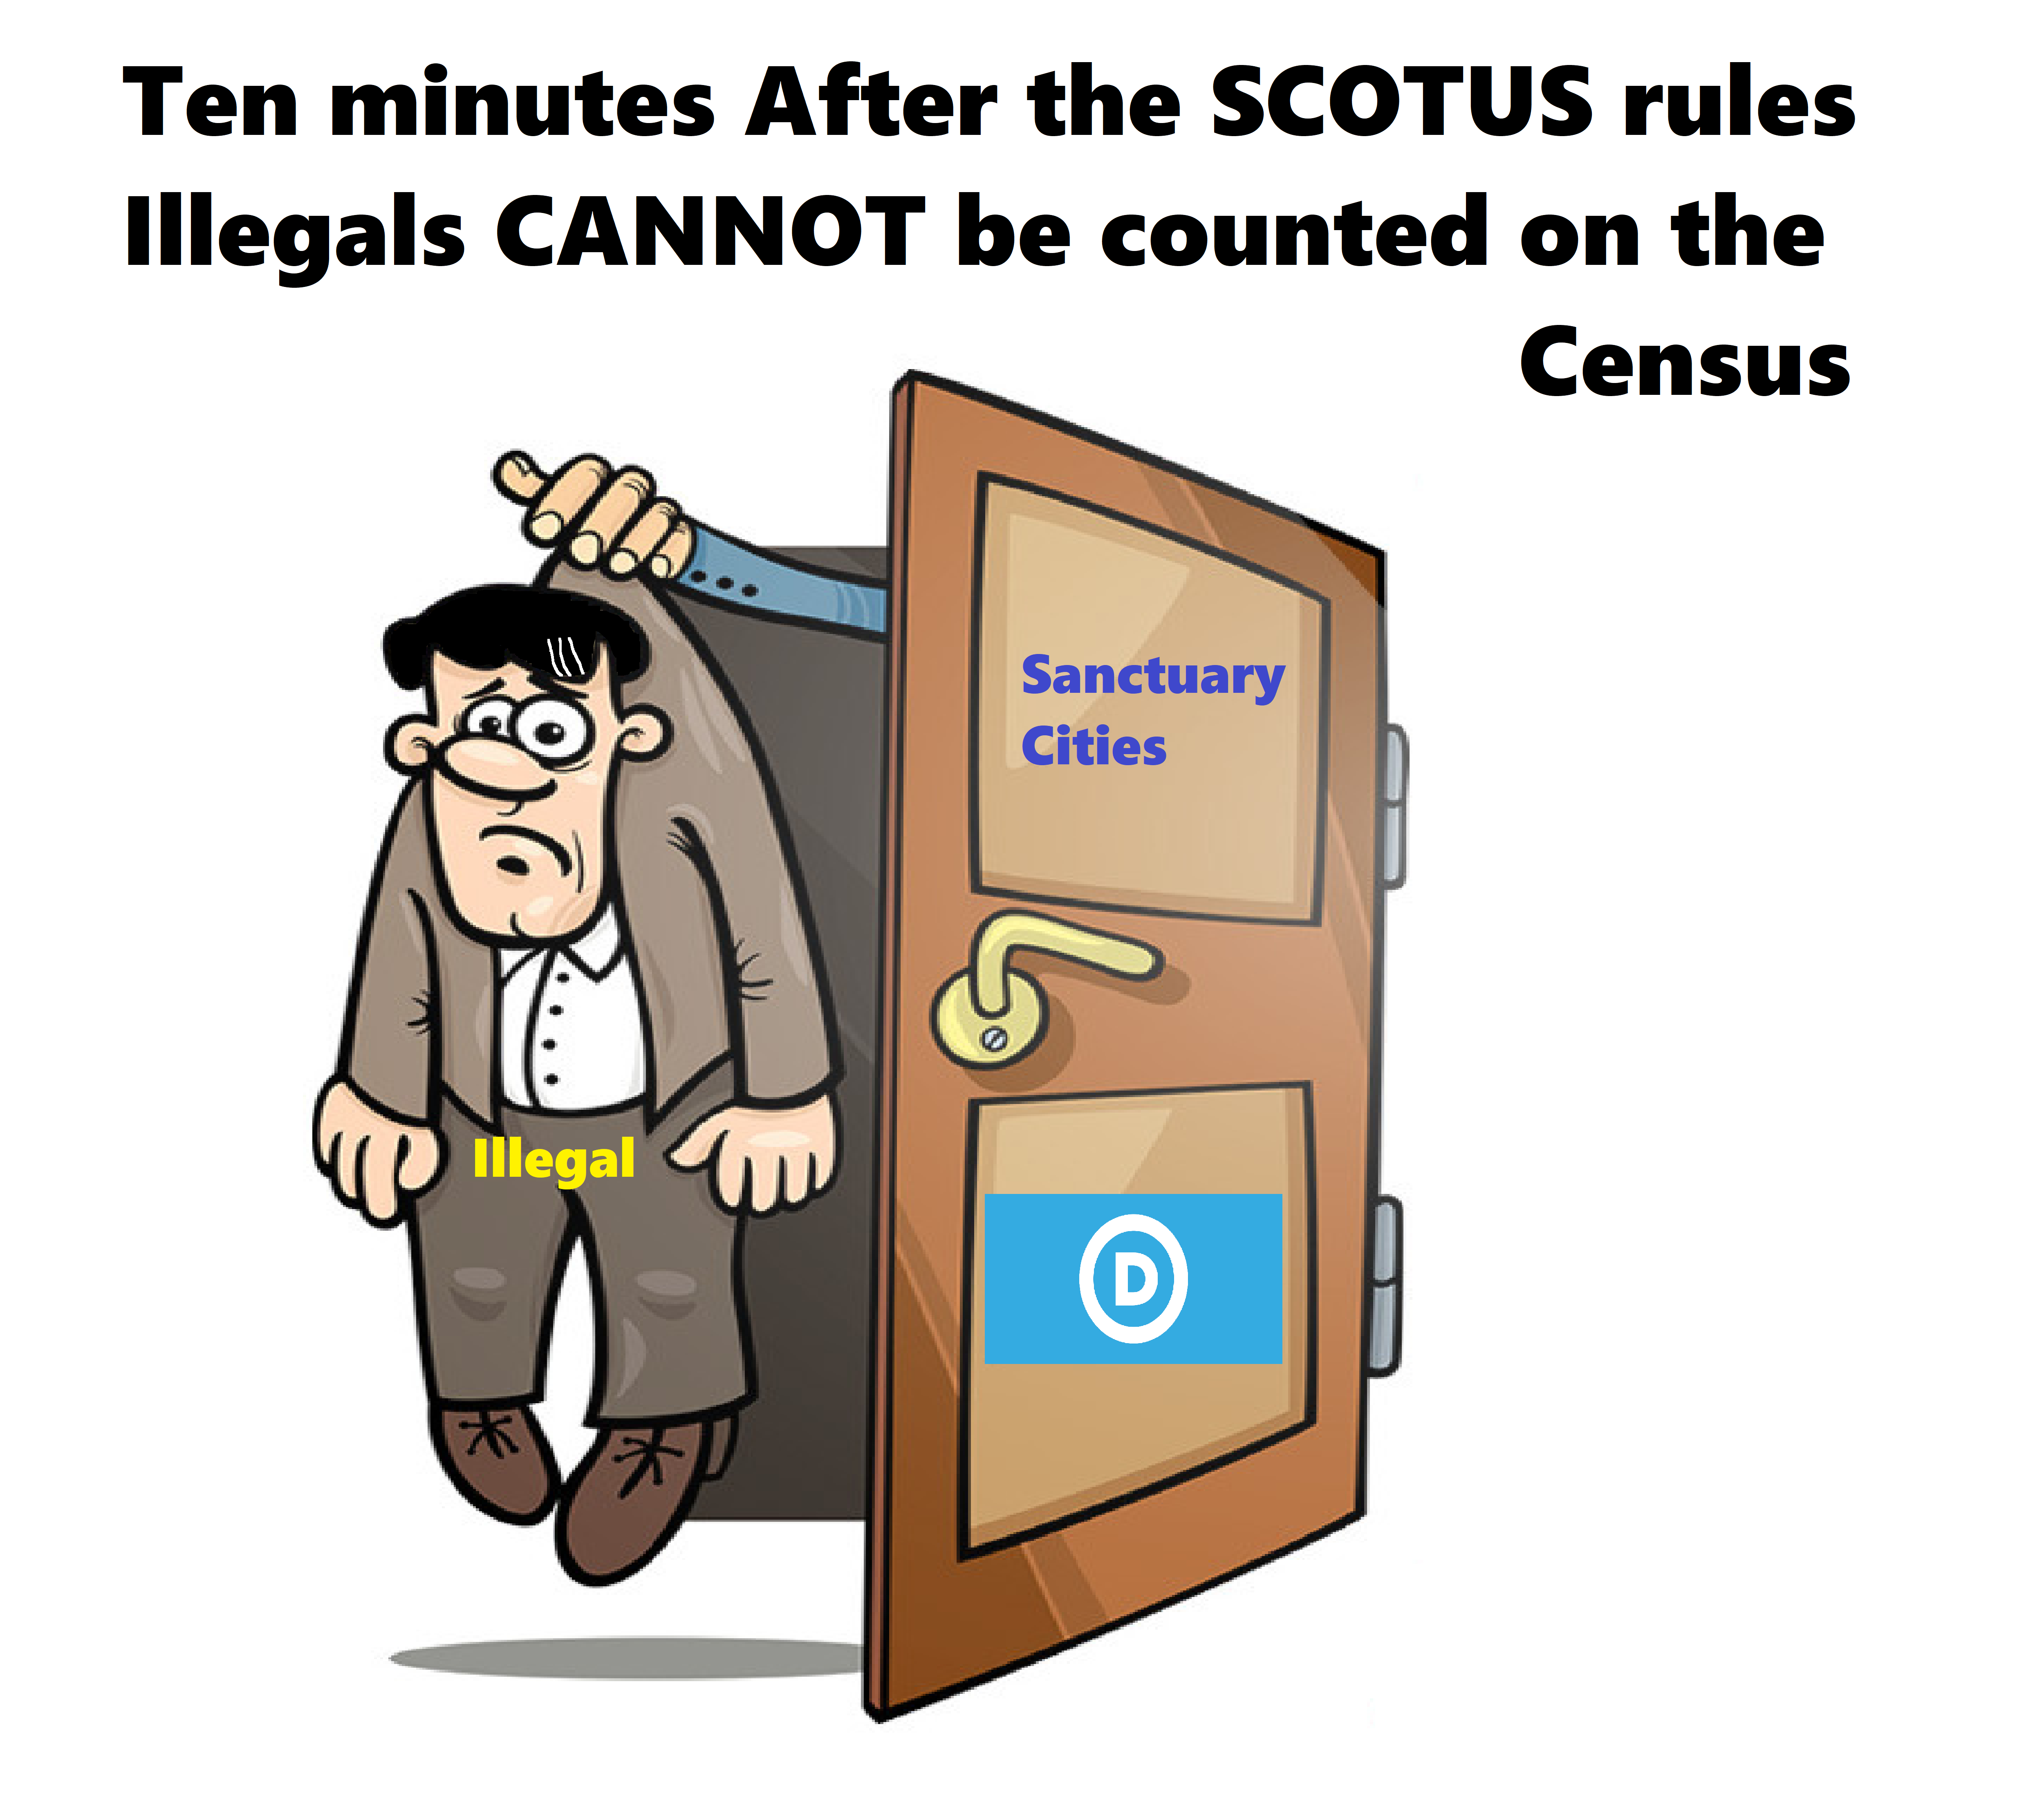 memes -  best life - Ten minutes After the Scotus rules Illegals Cannot be counted on the Census Sanctuary Cities Illegal